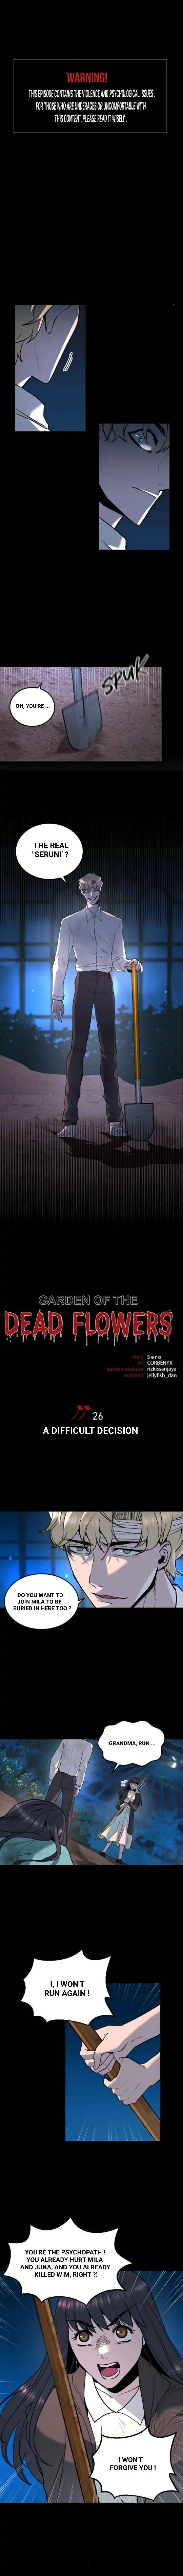 Garden Of The Dead Flowers - Page 1